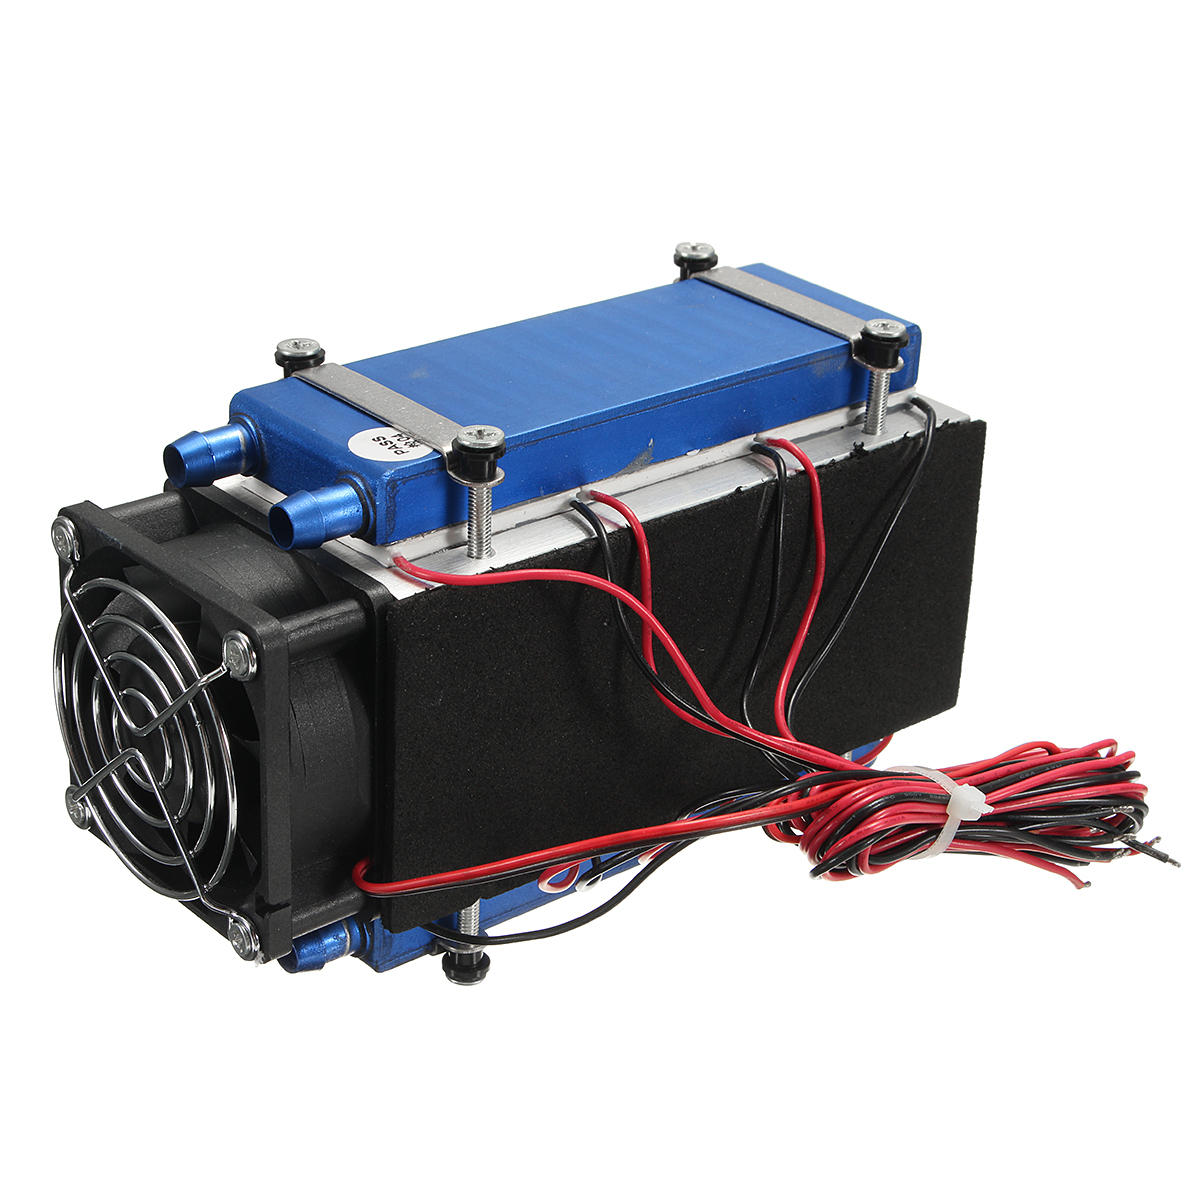 

420W 6 Chip Semiconductor Refrigeration Cooler Air Cooling Equipment DIY Radiator